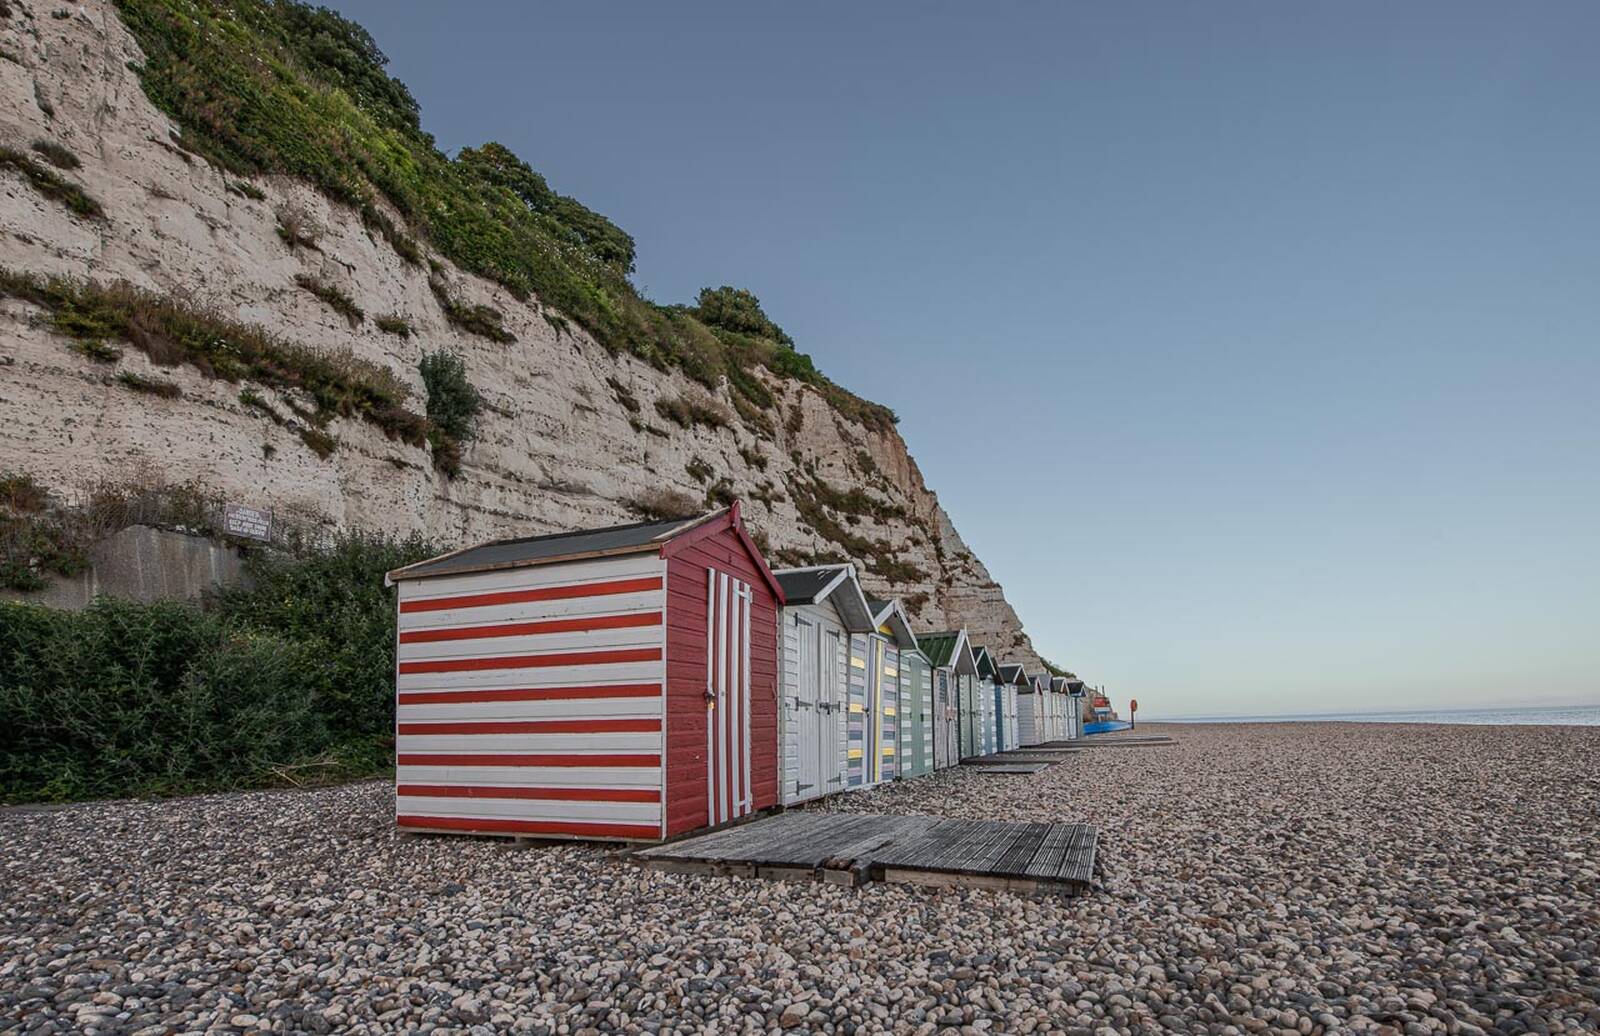 Image of Beer Beach by michael bennett